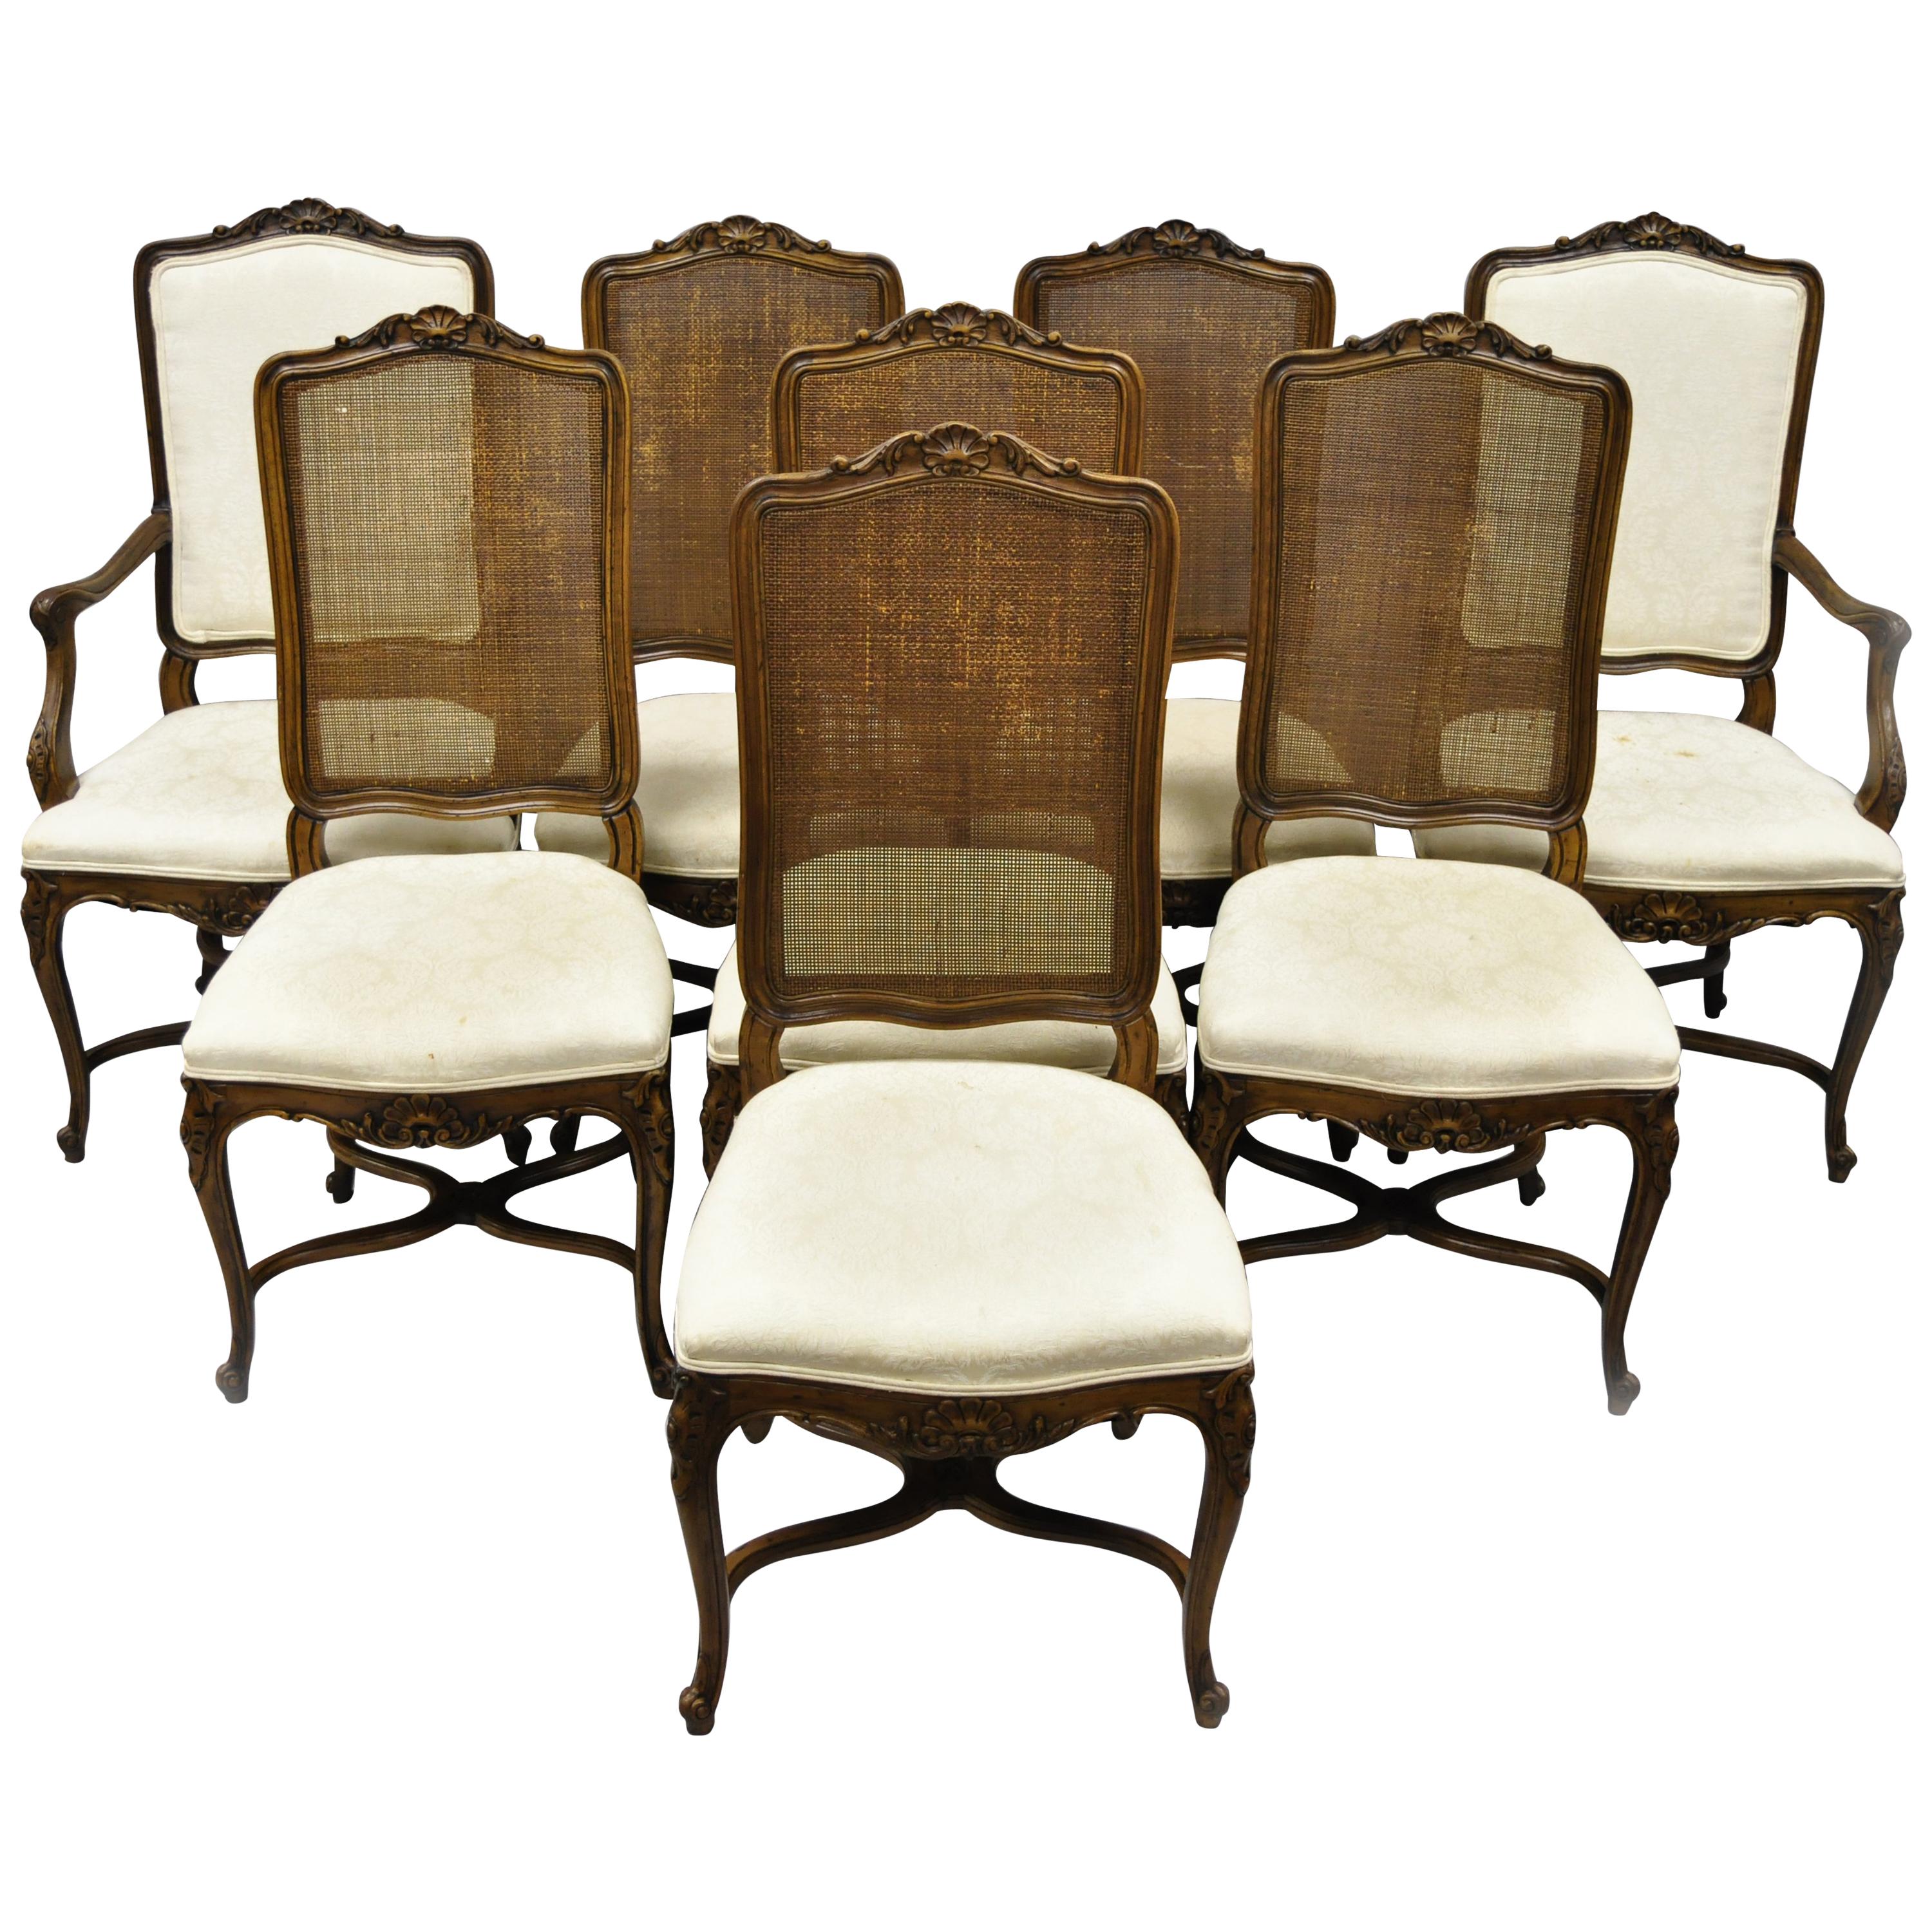 8 John Widdicomb Walnut Cane Back French Country Louis XV Style Dining Chairs